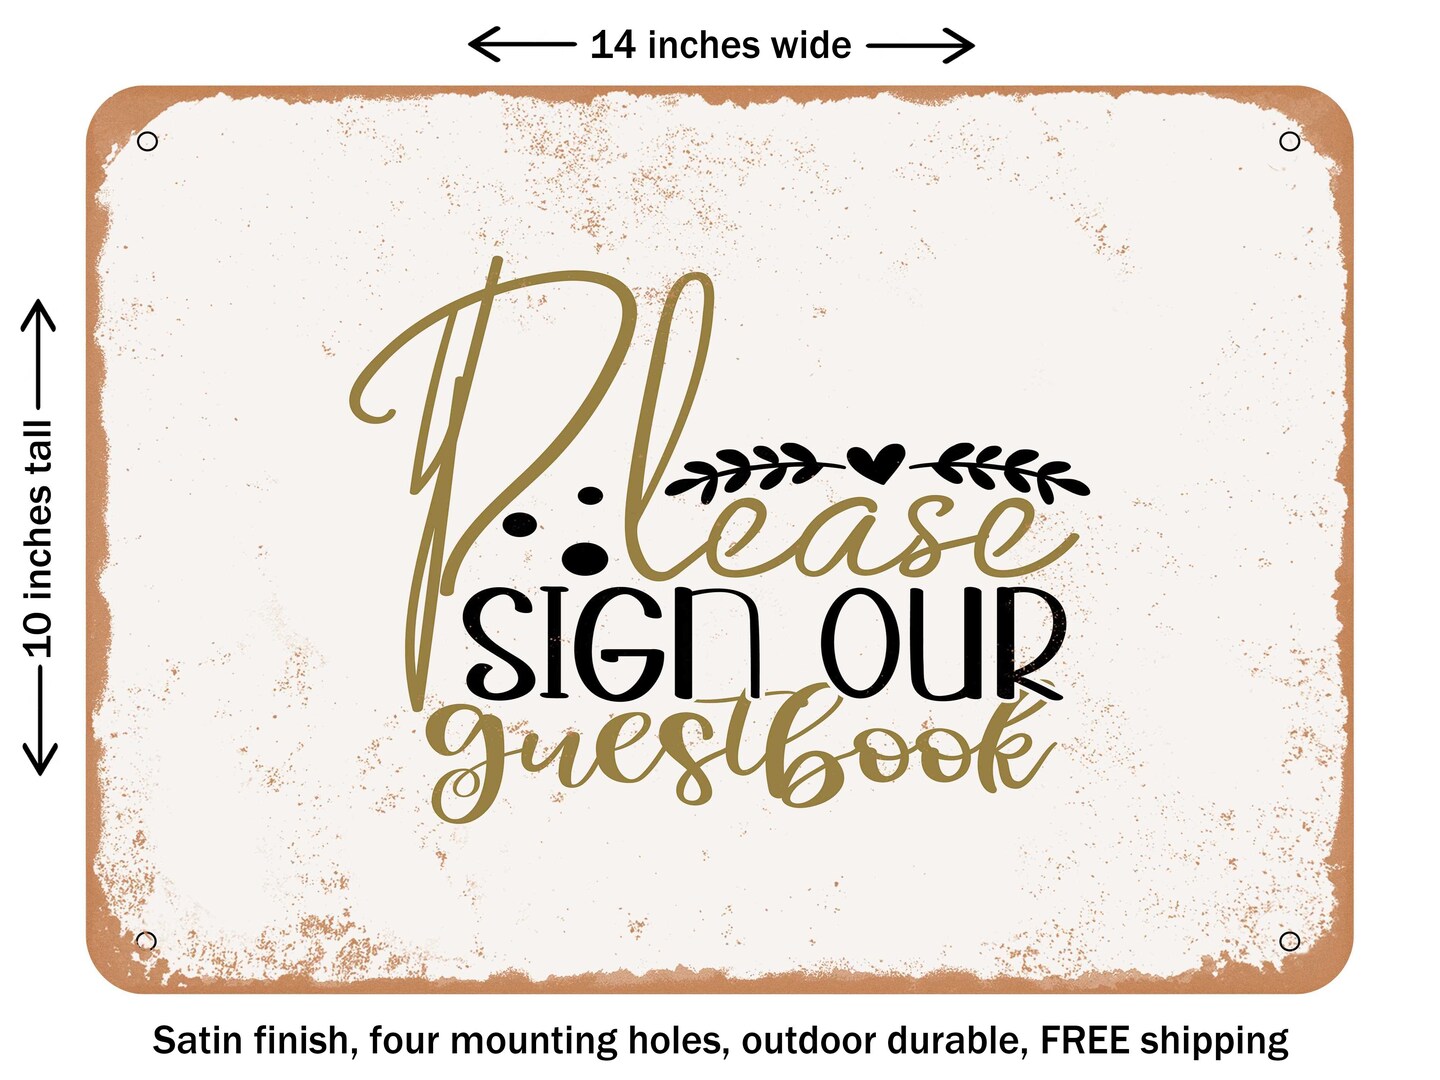 DECORATIVE METAL SIGN - Please Sign Our Guestbook - Vintage Rusty Look